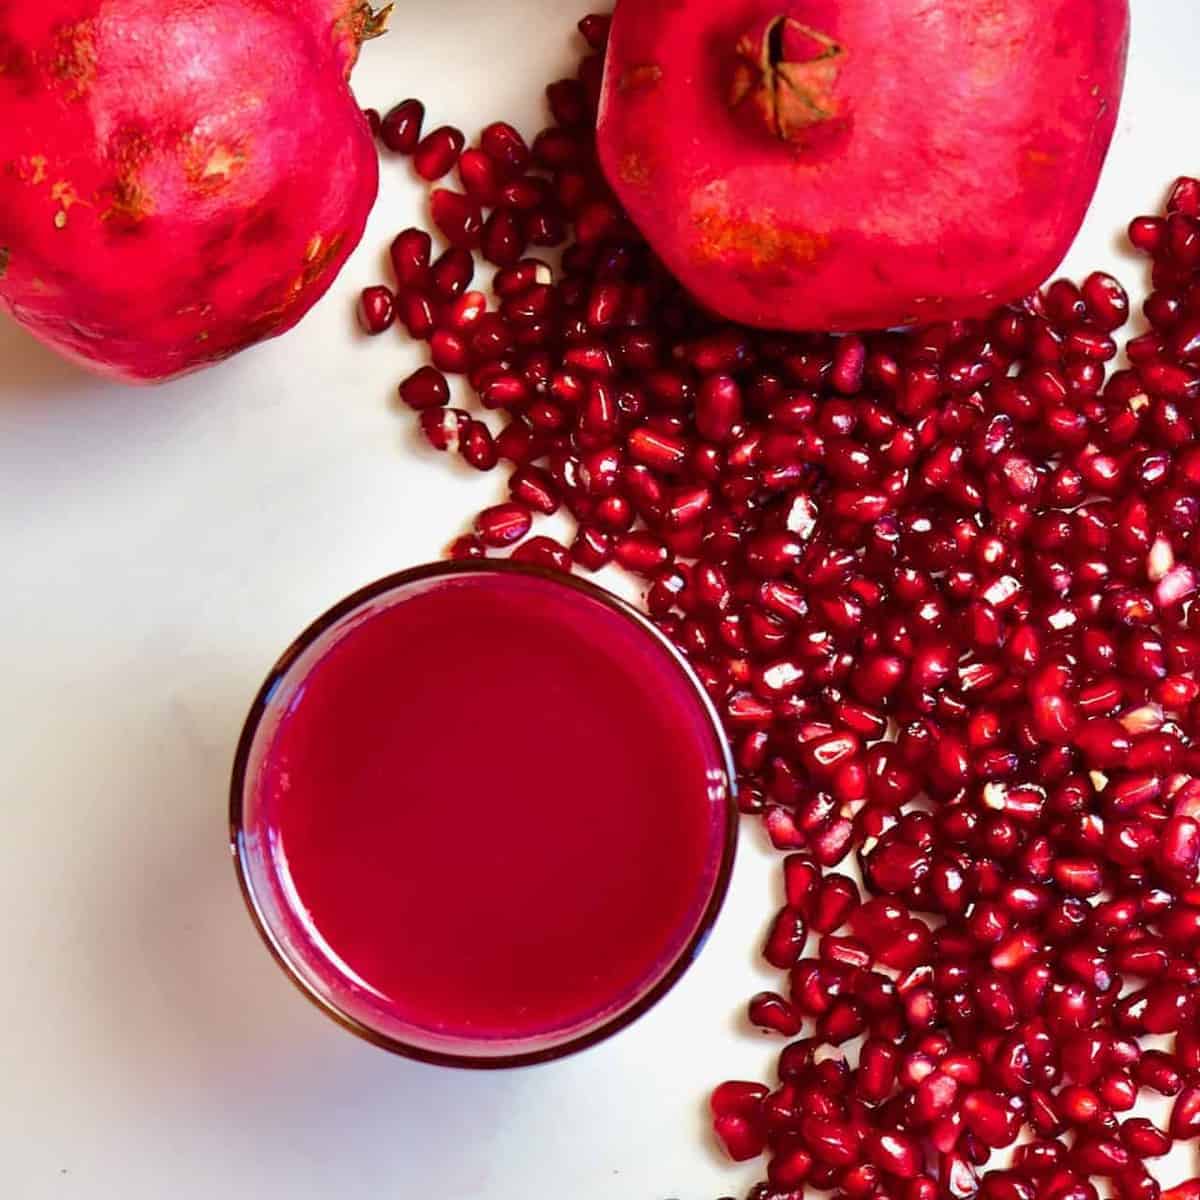 How to cut a pomegranate and make pomegranate juice - Alphafoodie